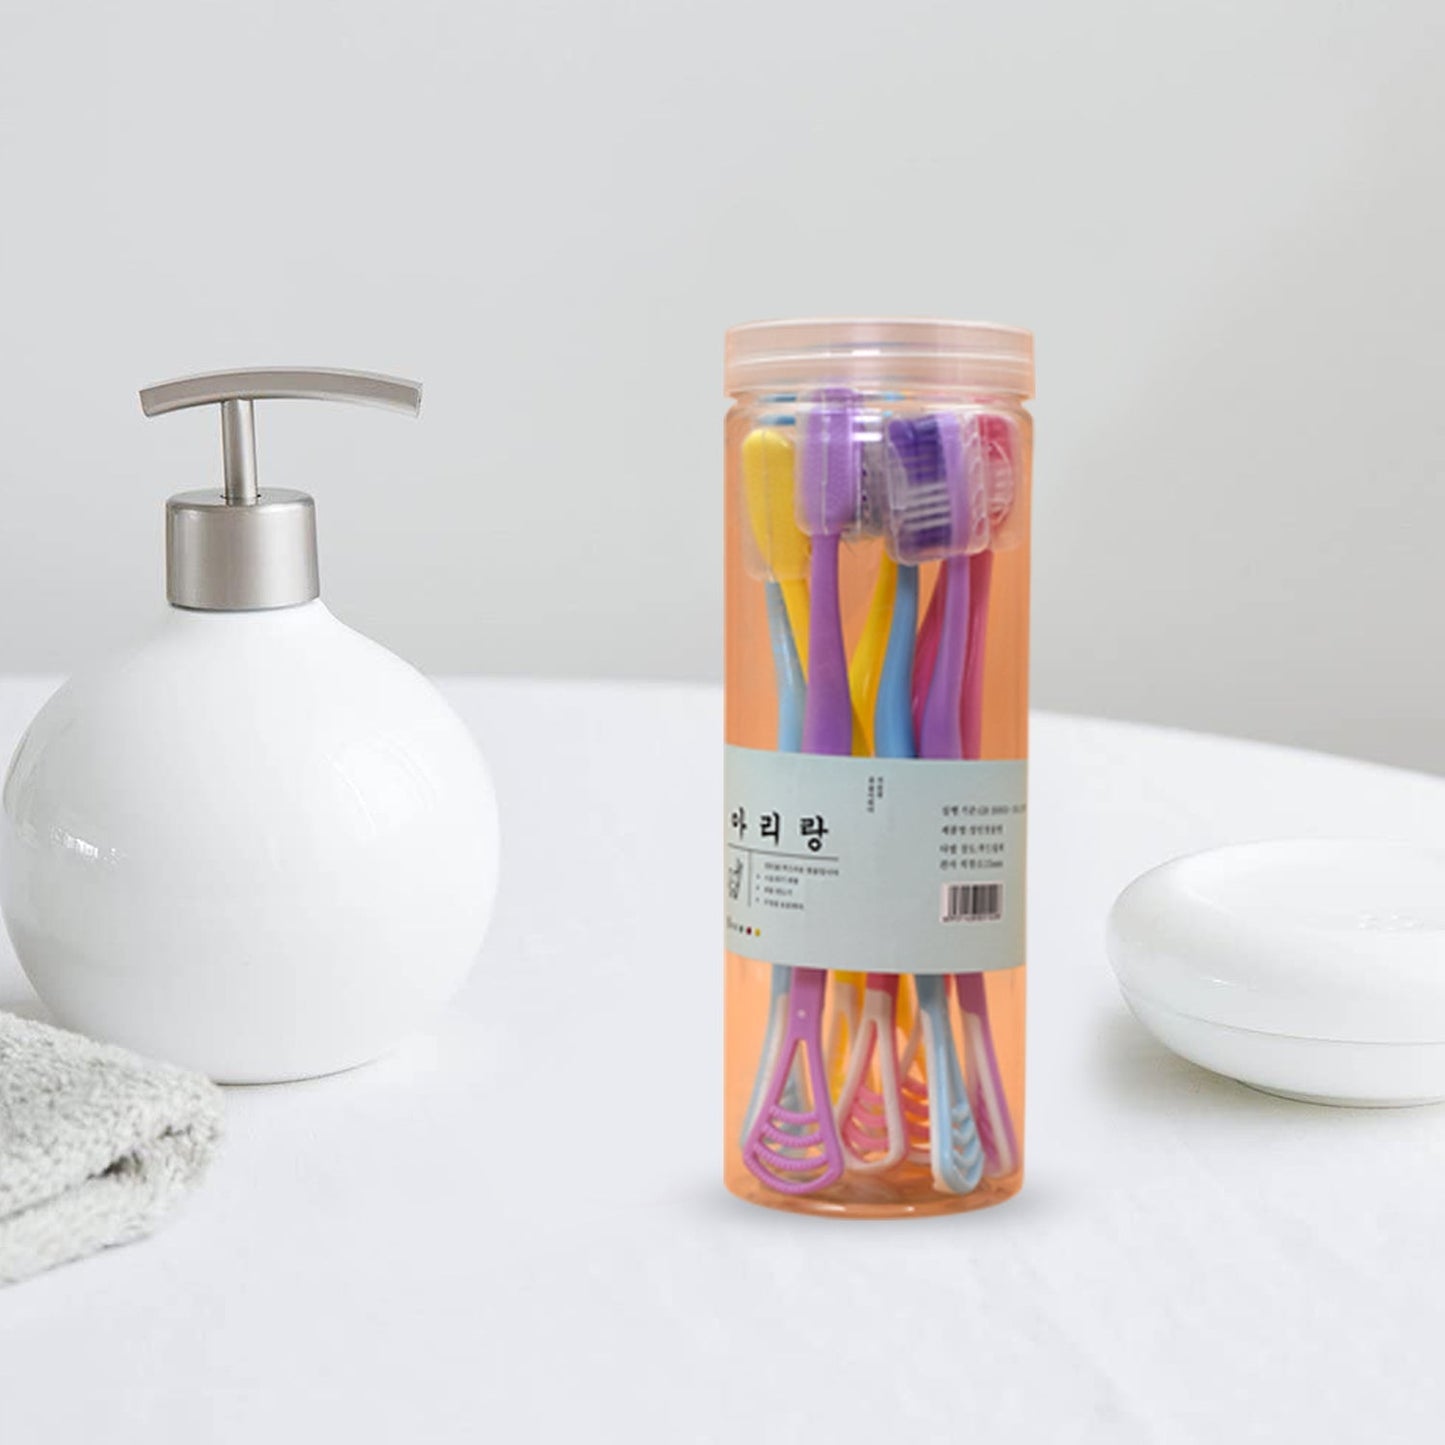 8 Pc 2 in 1 Toothbrush Case widely used in all types of bathroom places for holding and storing toothbrushes and toothpastes of all types of family members etc.